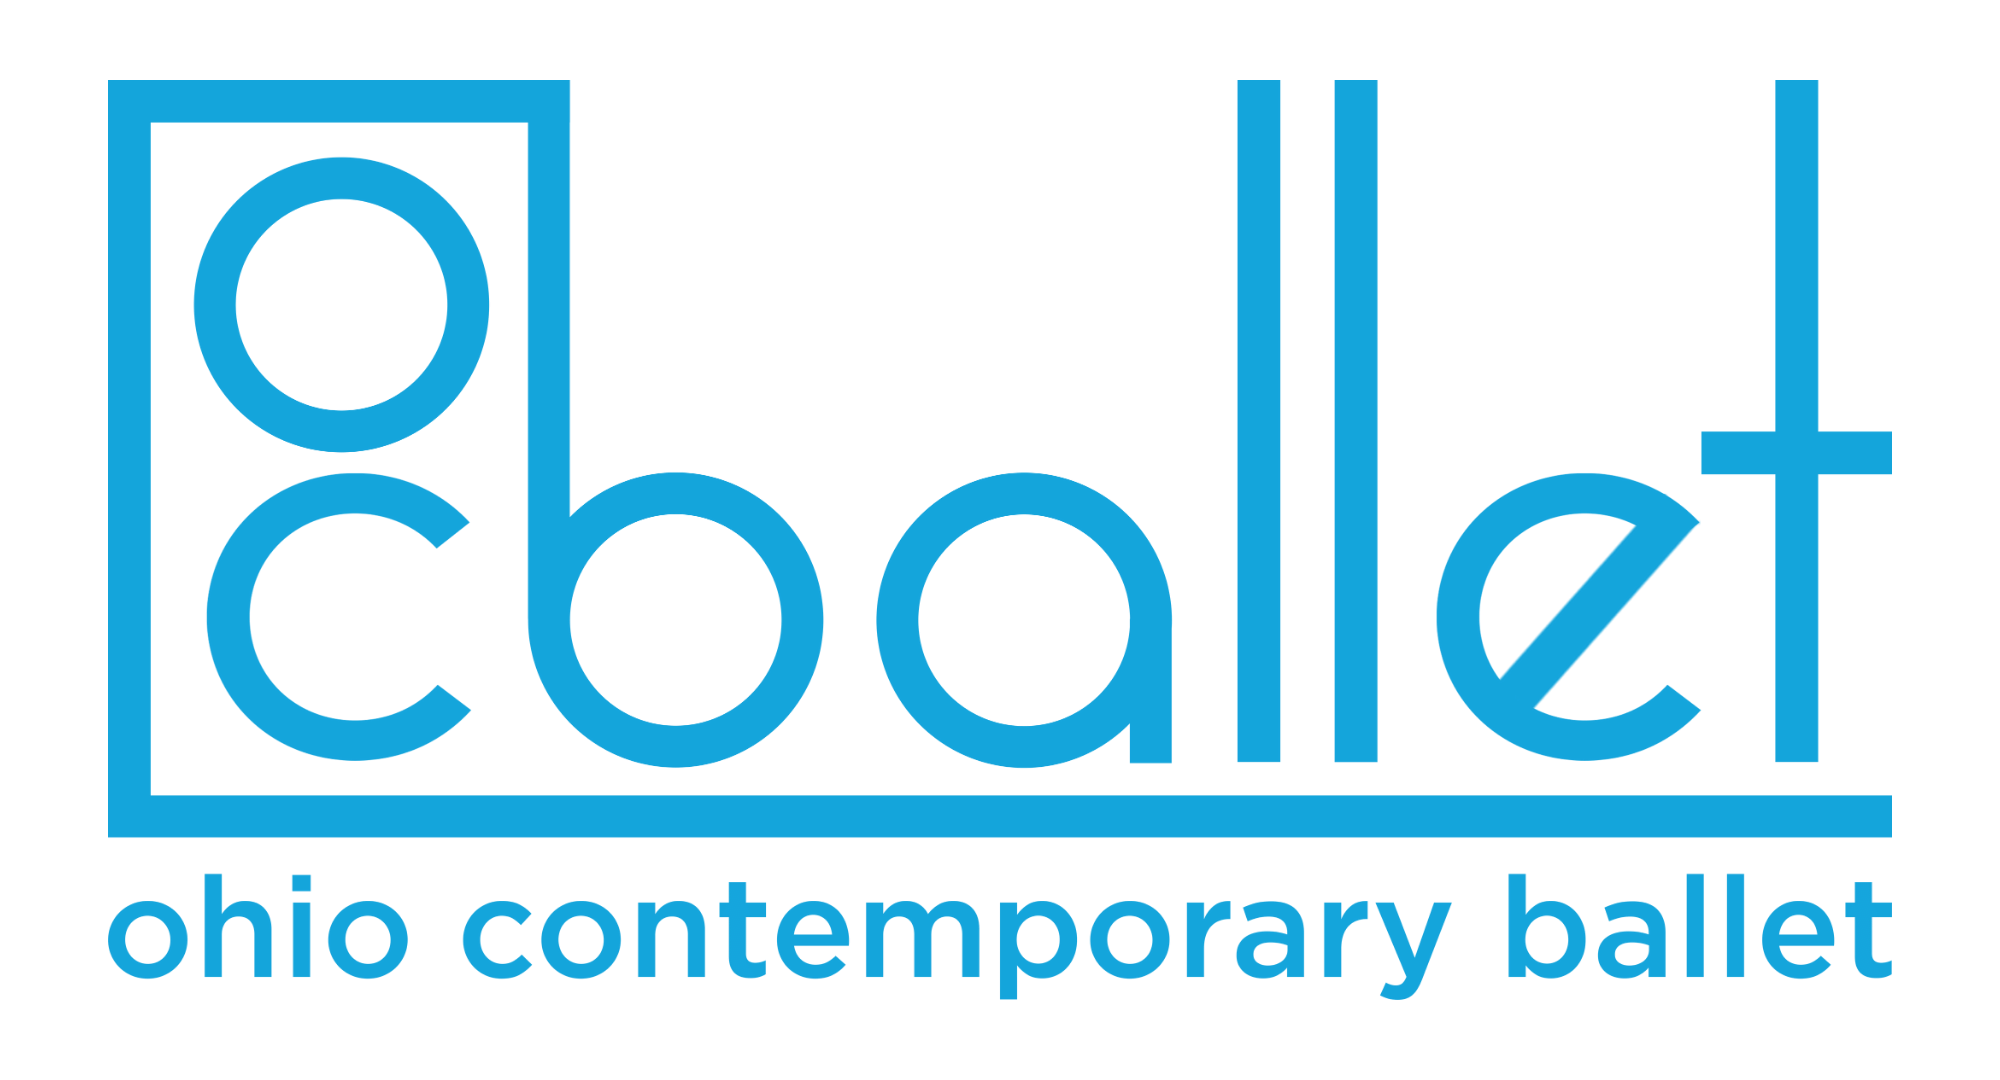 Ohio Contemporary Ballet formerly Verb Ballets